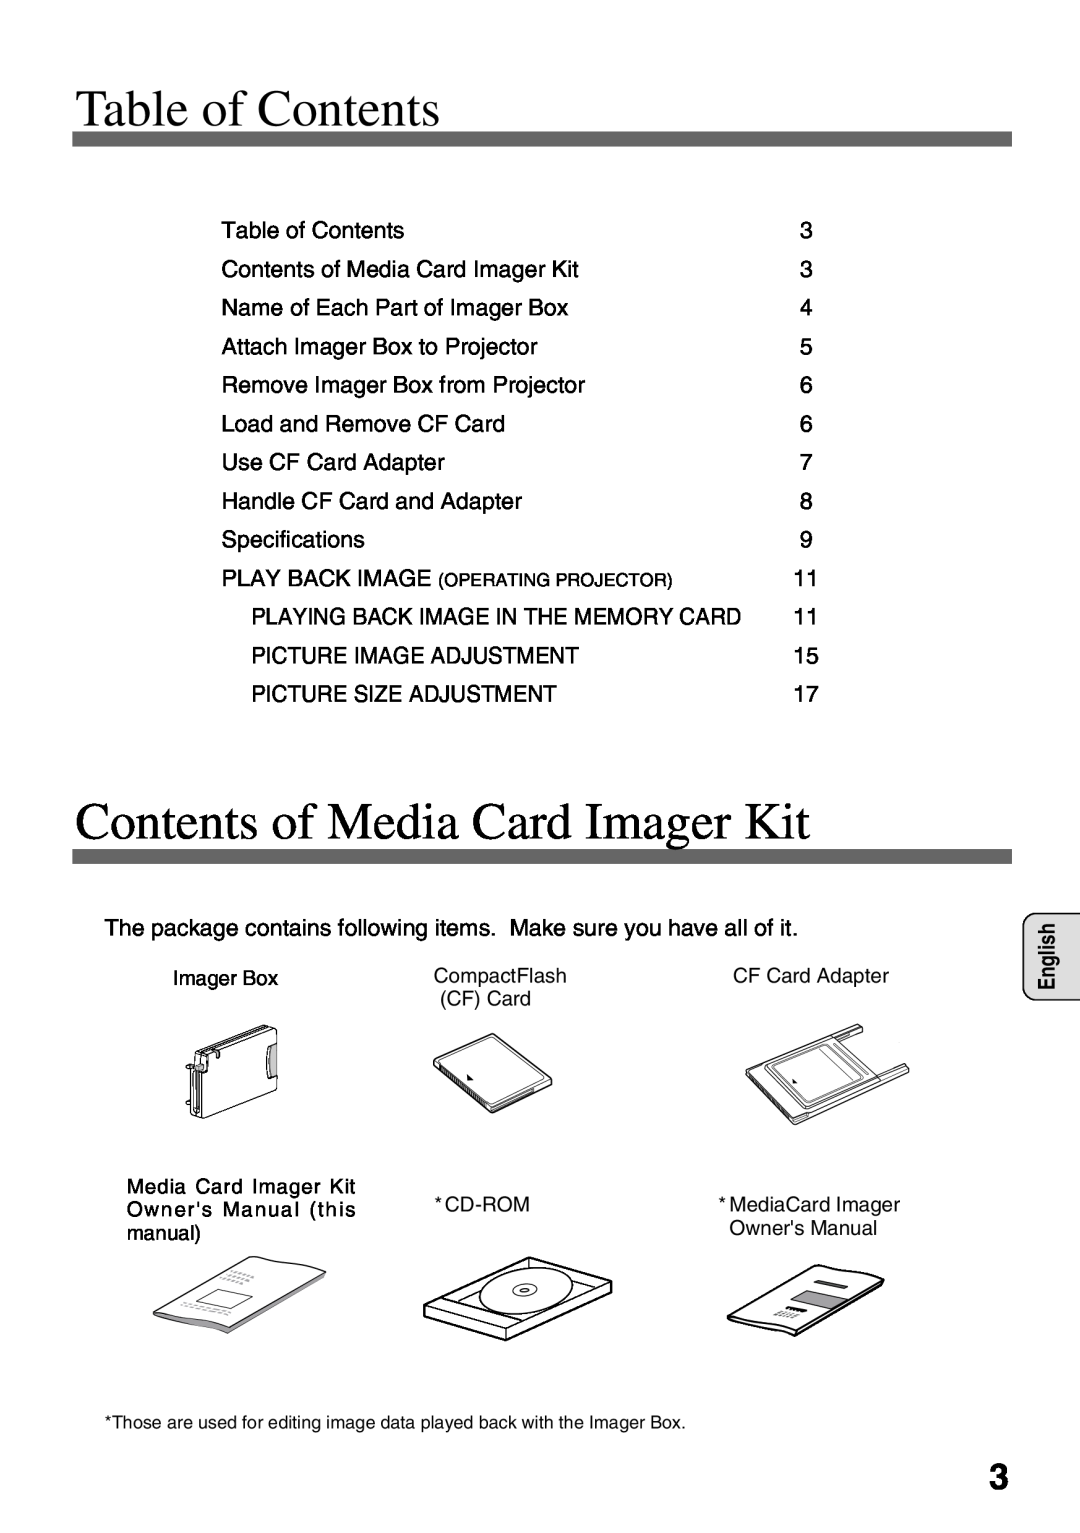 Eiki EVW-100 owner manual Table of Contents, Contents of Media Card Imager Kit 